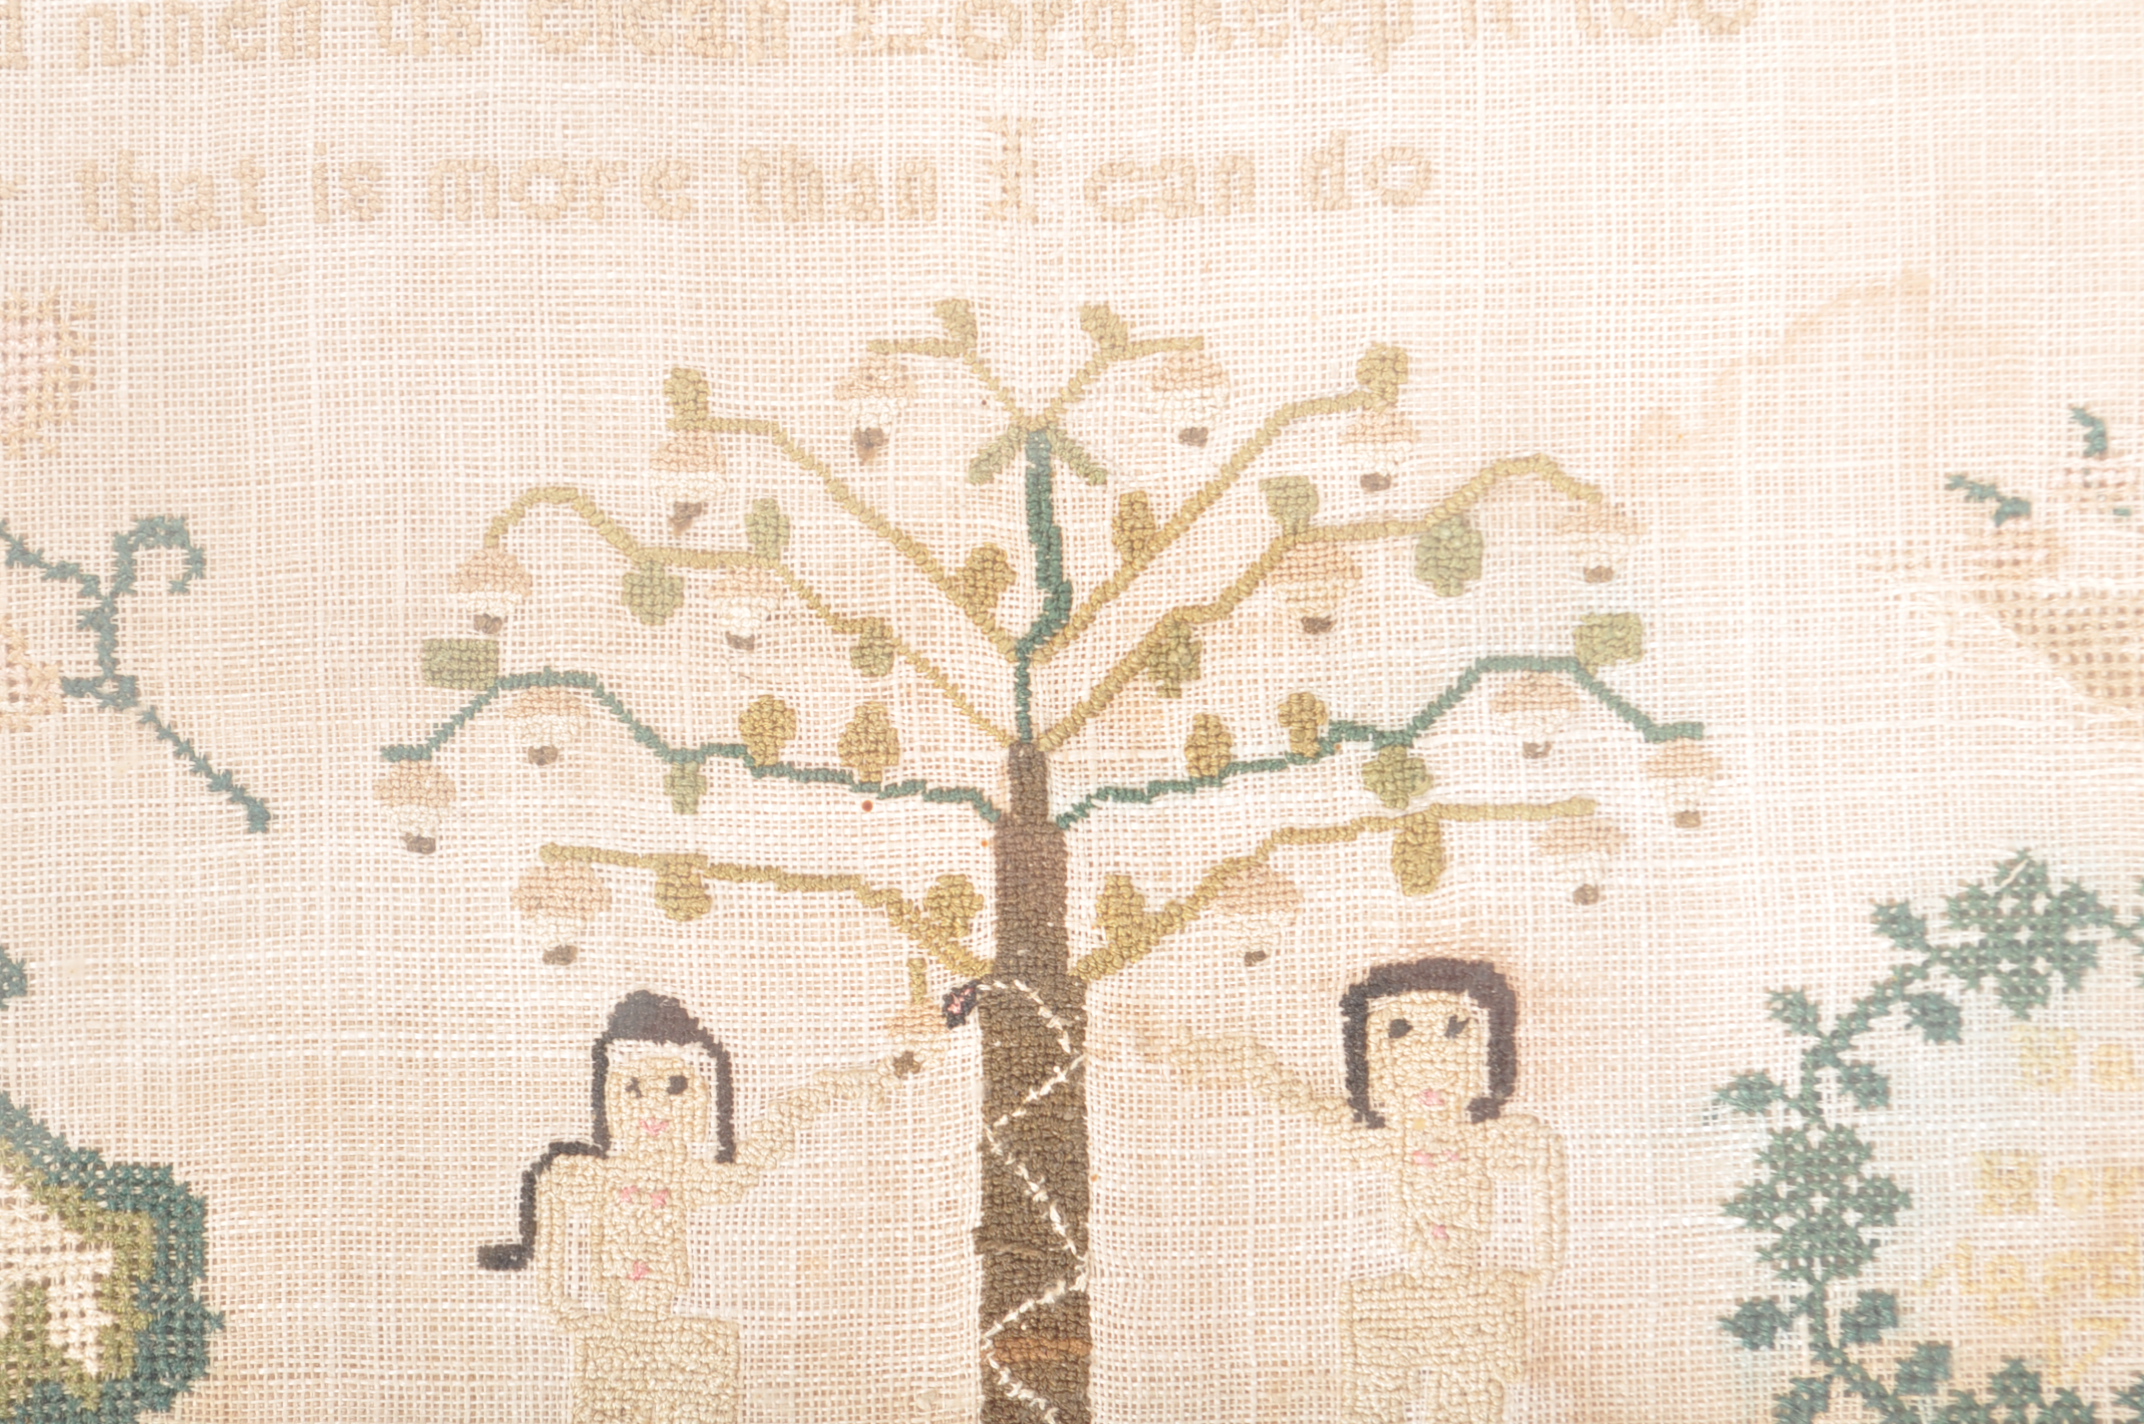 LATE 18TH CENTURY - 1785 TAPESTRY SAMPLER OF ADAM AND EVE - Image 3 of 5